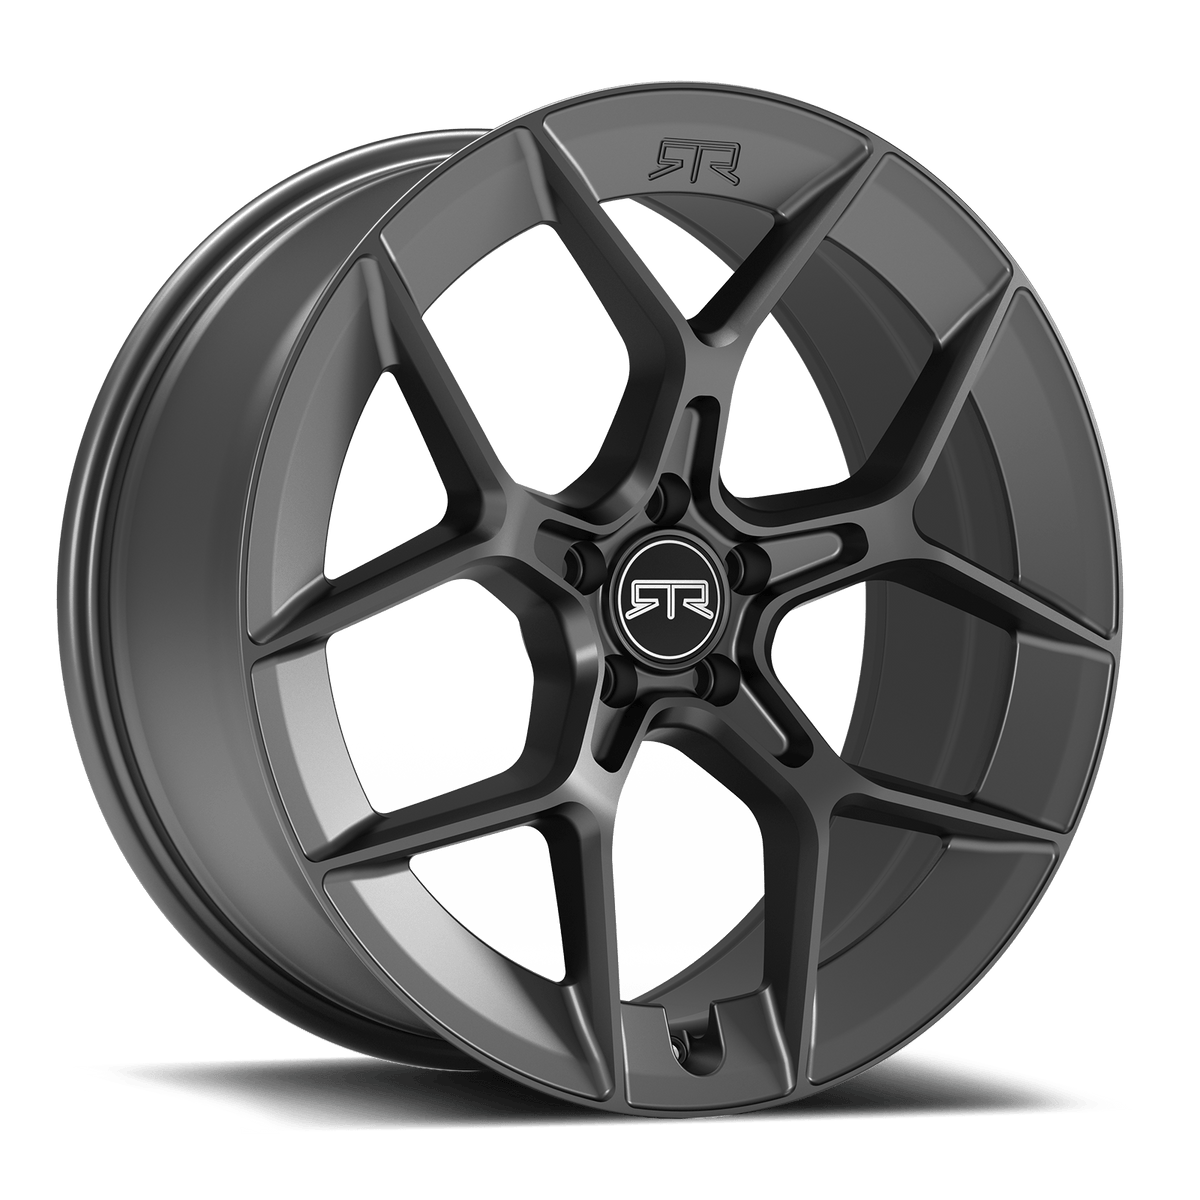 &quot;RTR Aero 5 Mustang Mach-E Wheel | Satin Black/Satin Charcoal | 20x8.5 +31 Offset | Fits 2021+ Mustang Mach-E | Flow Forming Technology | Hub-Centric Design | Enhanced Aerodynamics | Precision Craftsmanship | Upgrade Your Mach-E&#39;s Style and Performance&quot;